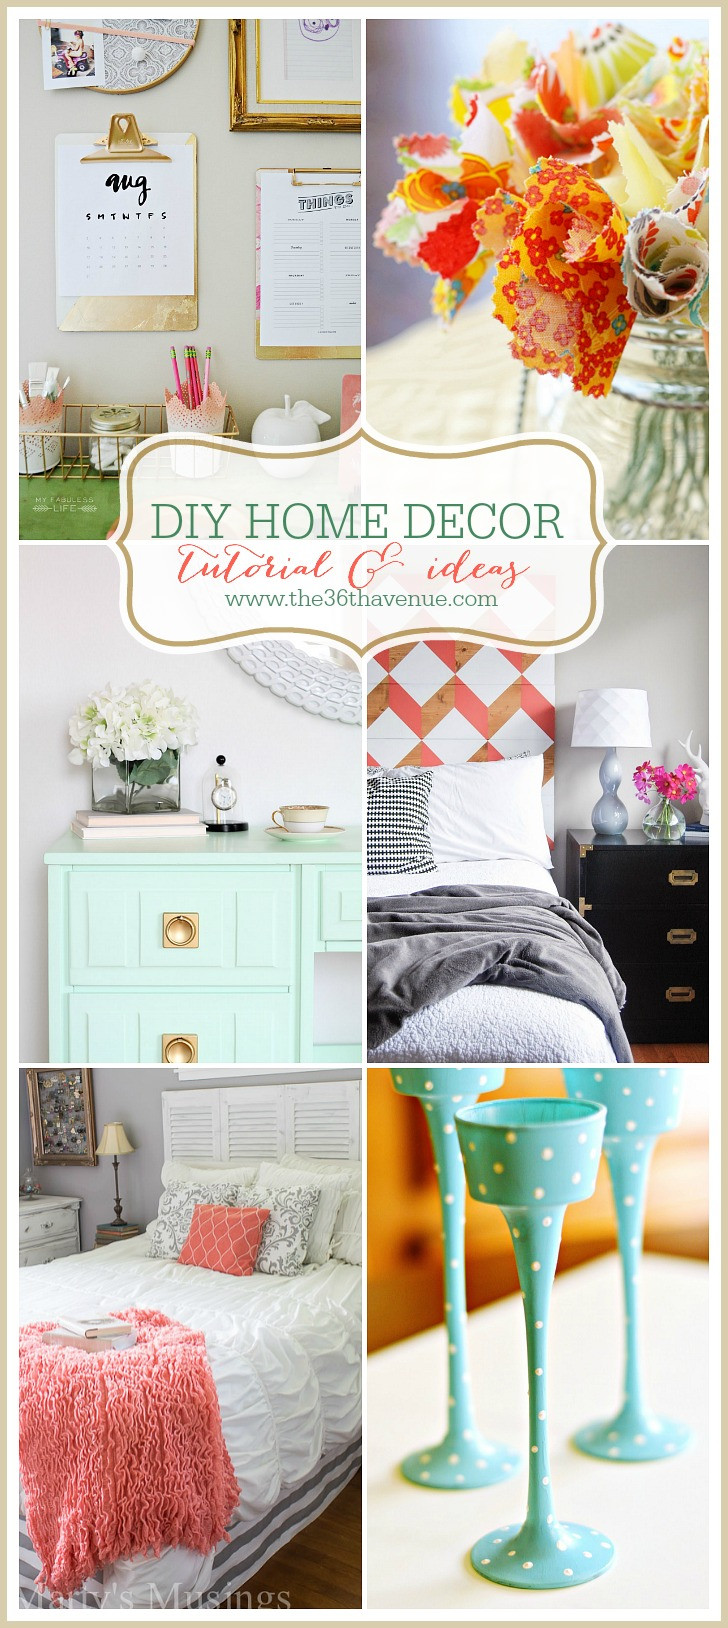 Diy Projects
 The 36th AVENUE Home Decor DIY Projects